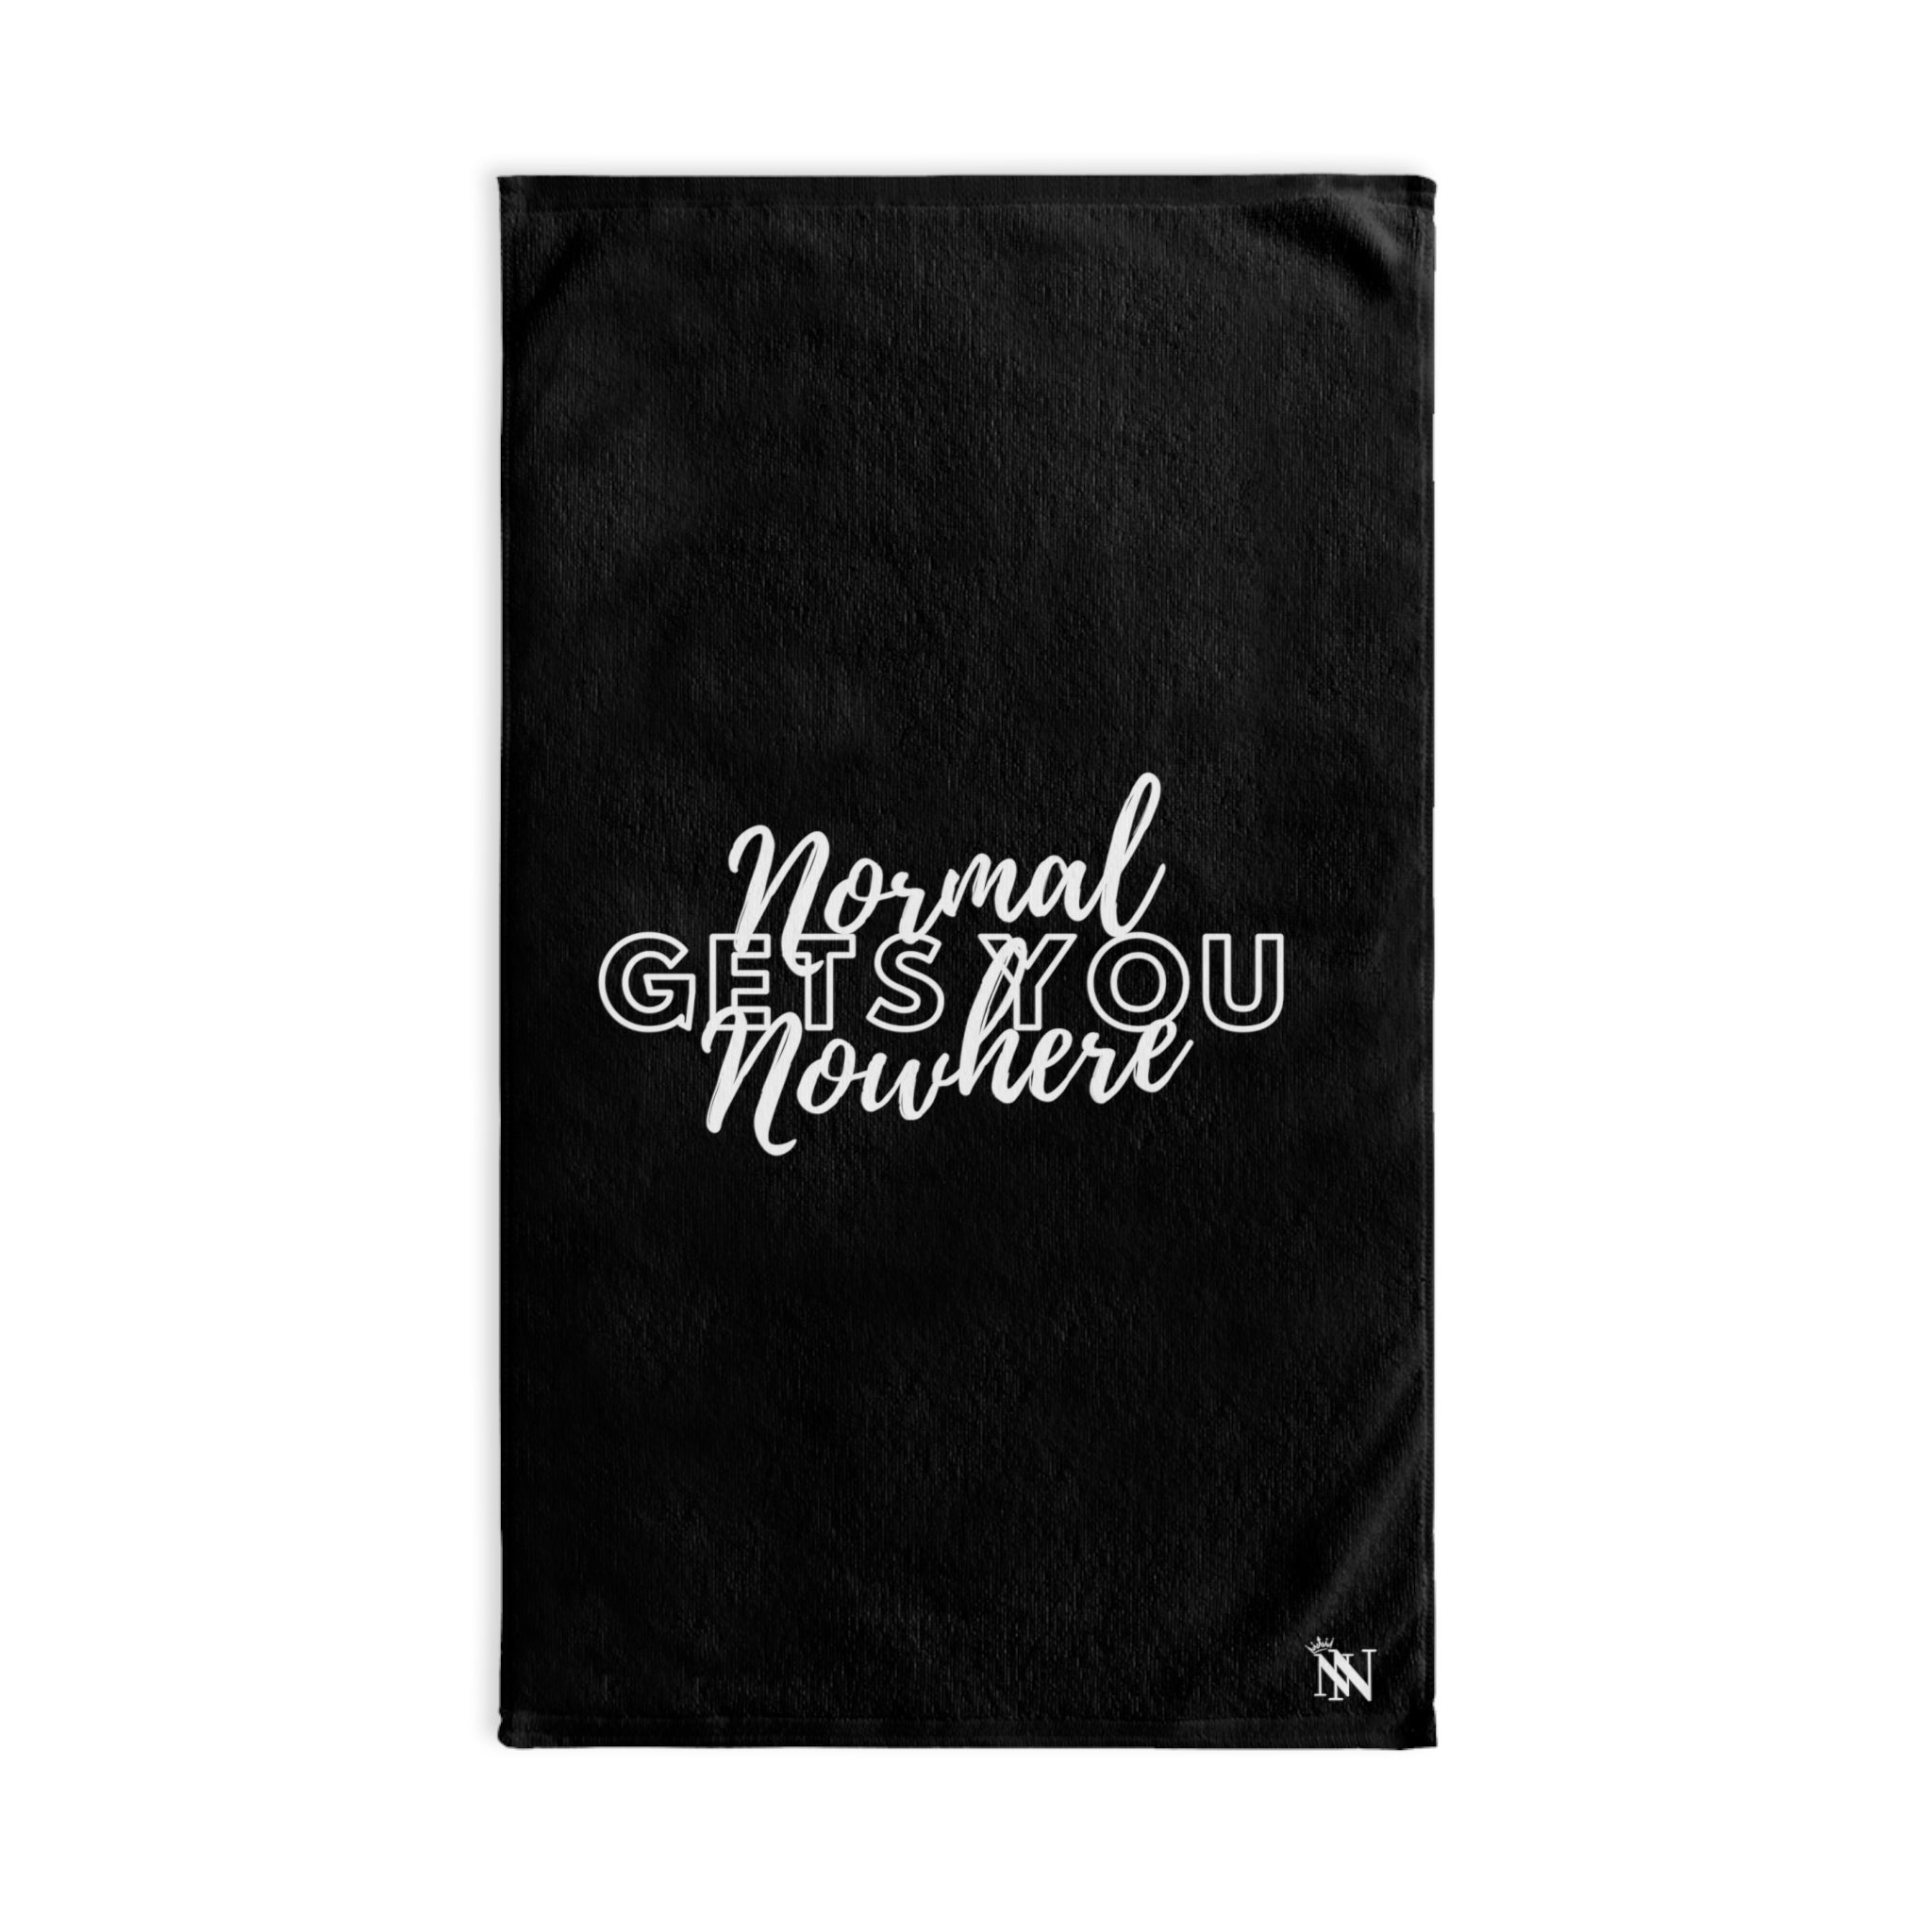 Normal Nowhere Black | Sexy Gifts for Boyfriend, Funny Towel Romantic Gift for Wedding Couple Fiance First Year 2nd Anniversary Valentines, Party Gag Gifts, Joke Humor Cloth for Husband Men BF NECTAR NAPKINS